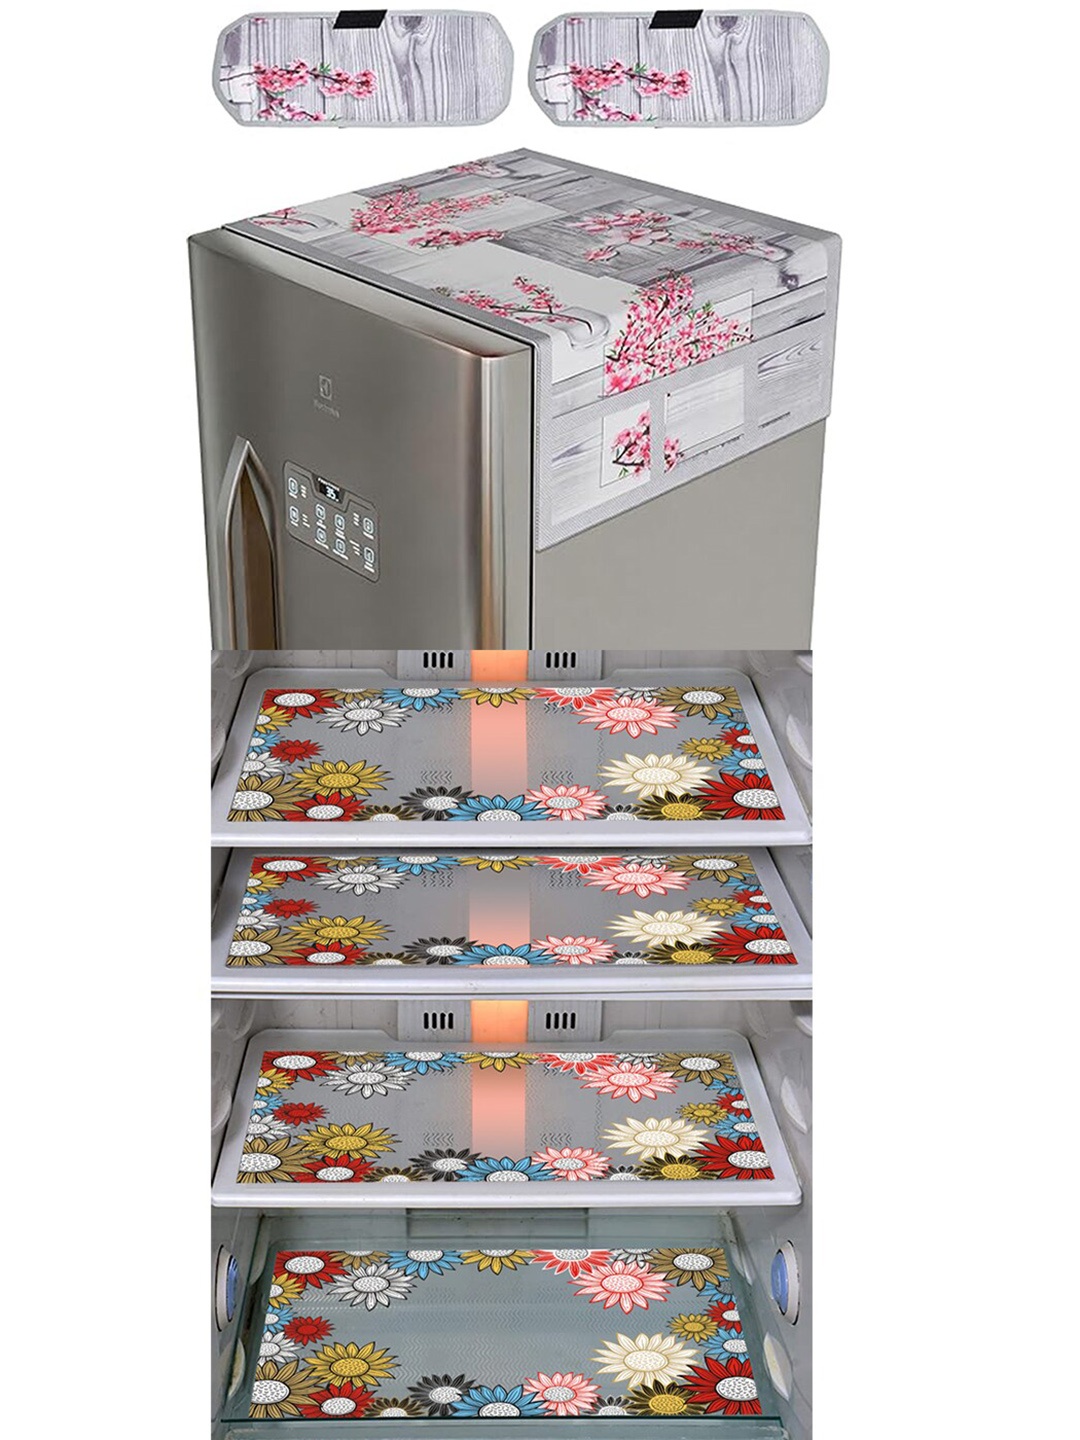 

Dakshya Industries 7 Pieces Grey & Pink Printed Refrigerator Appliance Covers